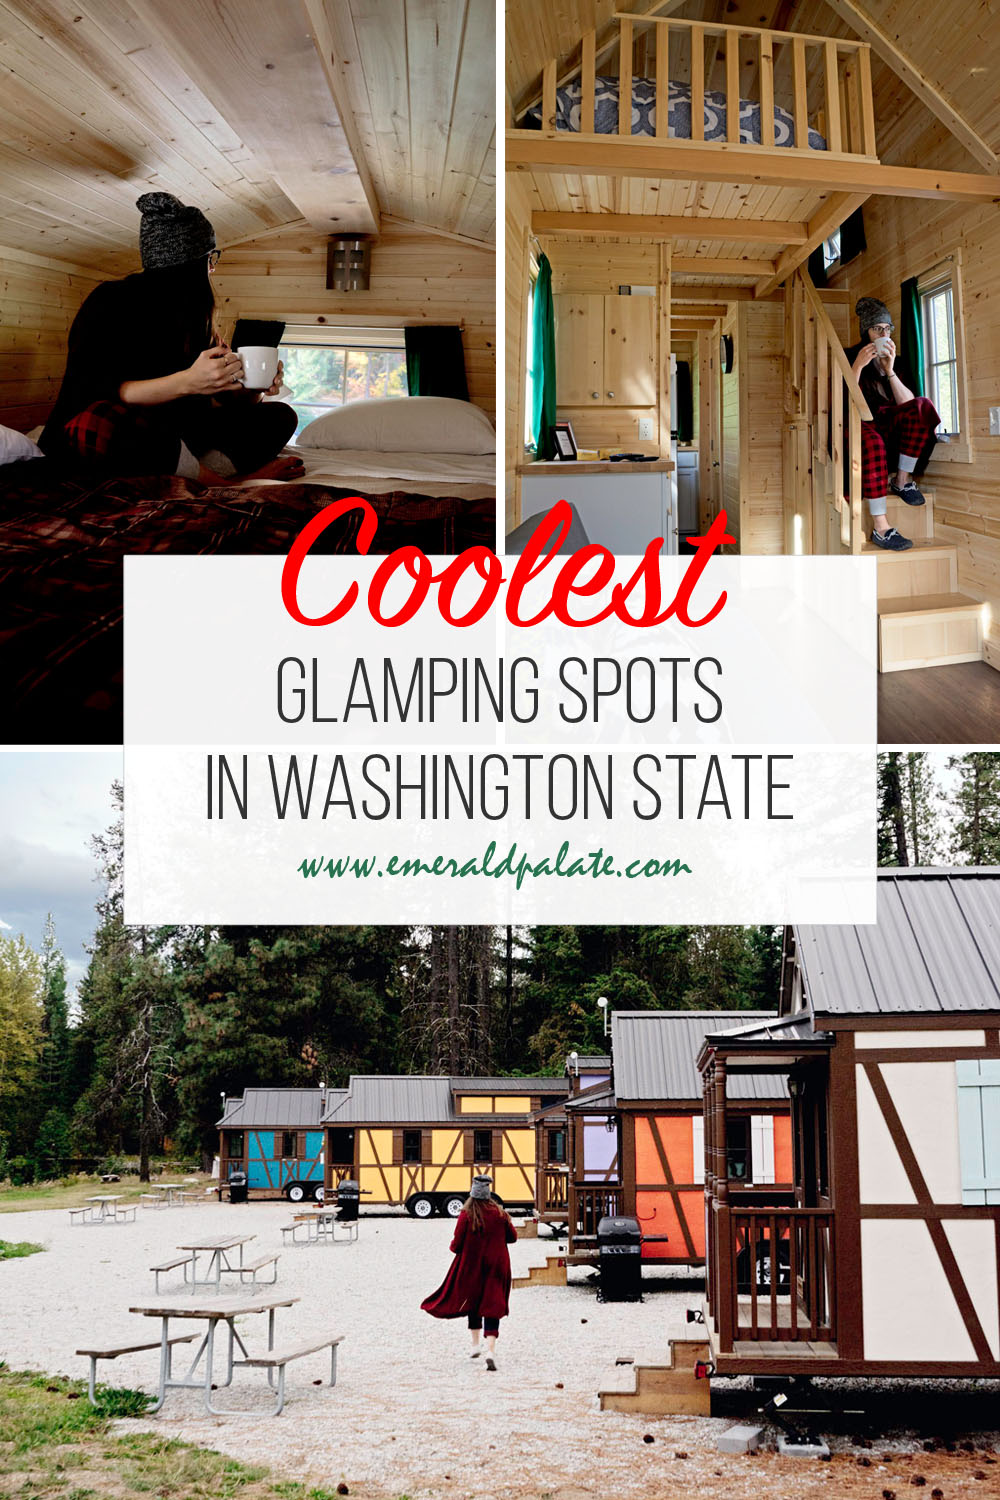 The best glamping in Washington state, according to a local. From tiny homes, cabins in Washington state, yurts, treehouses, trailer resorts, teepees, and more, find the best spots for unique stays in Washington.